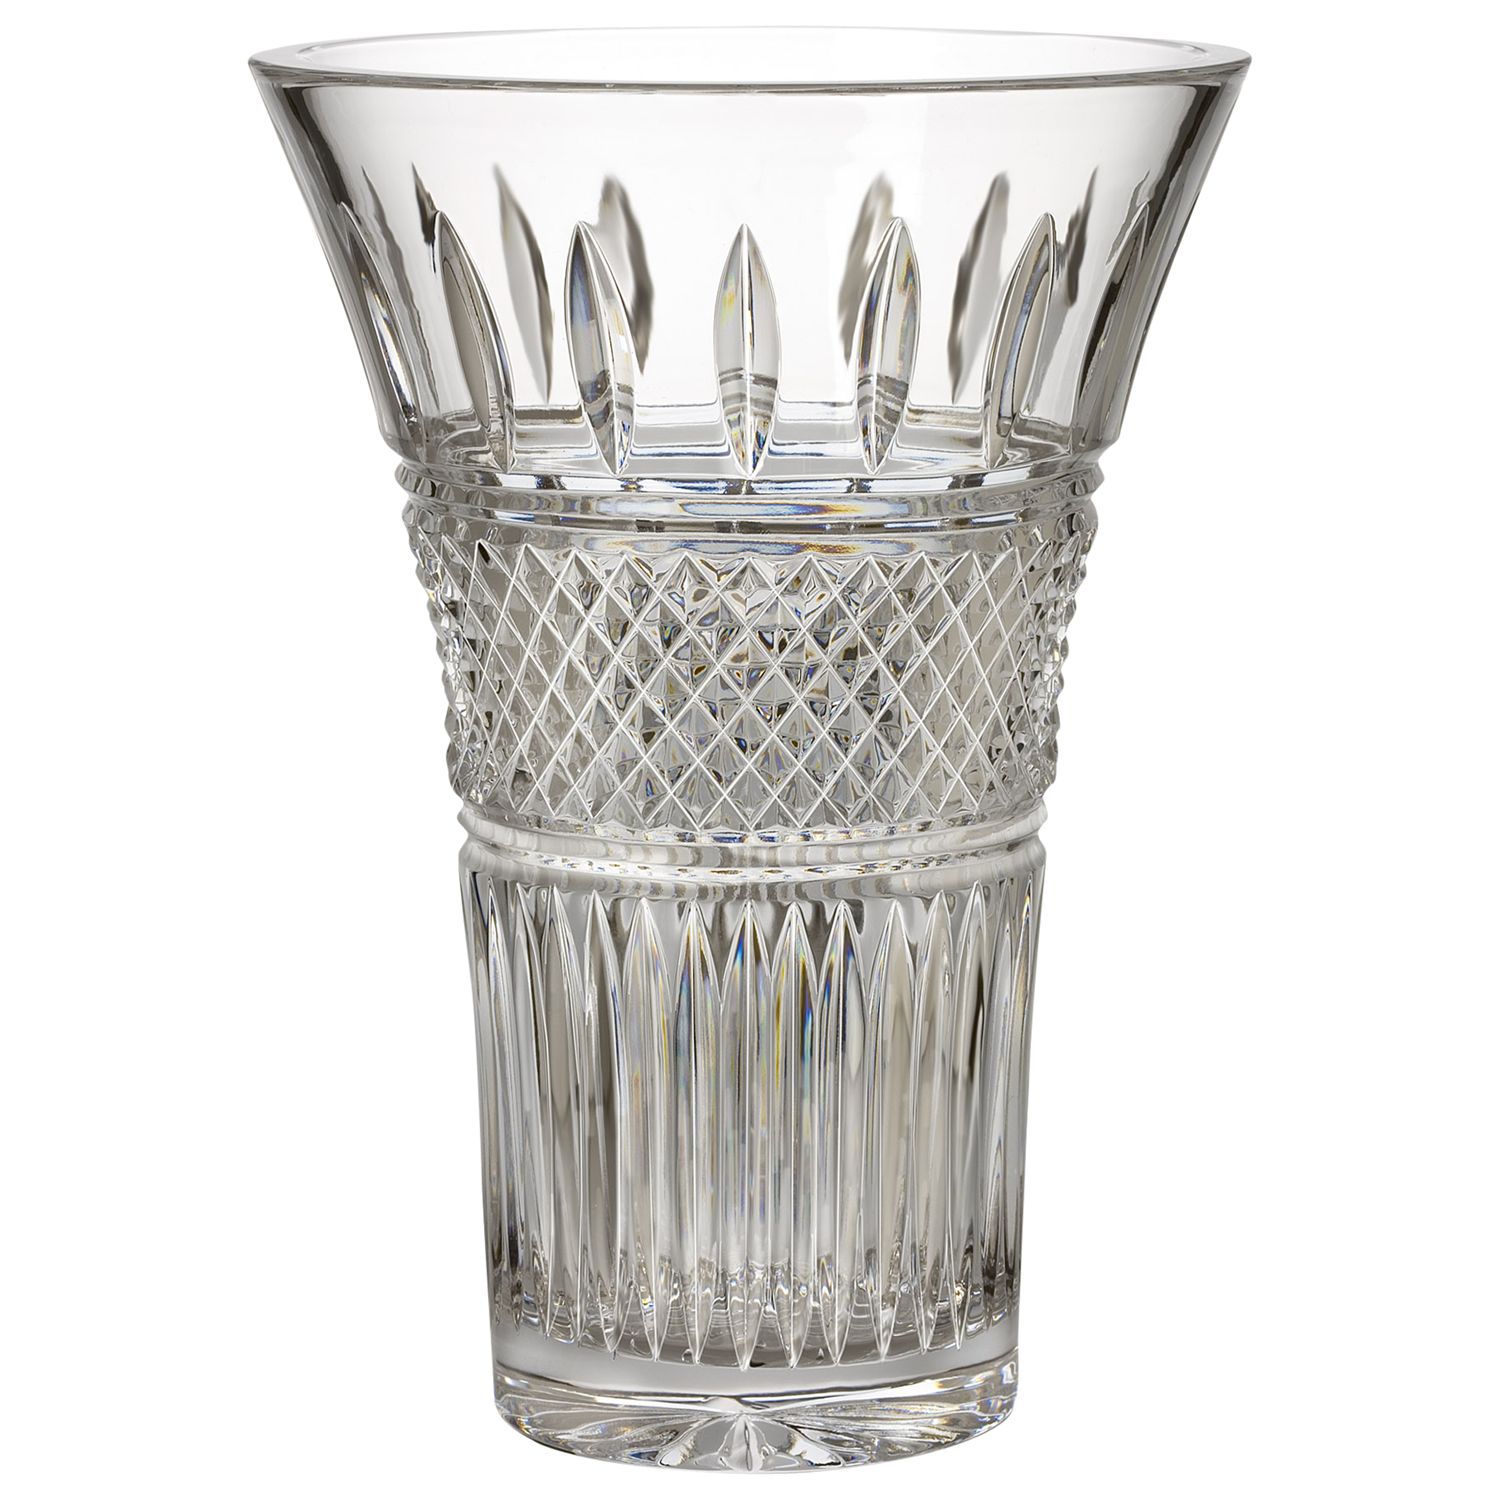 Waterford Crystal Irish Lace Cut Glass Vase, H25cm